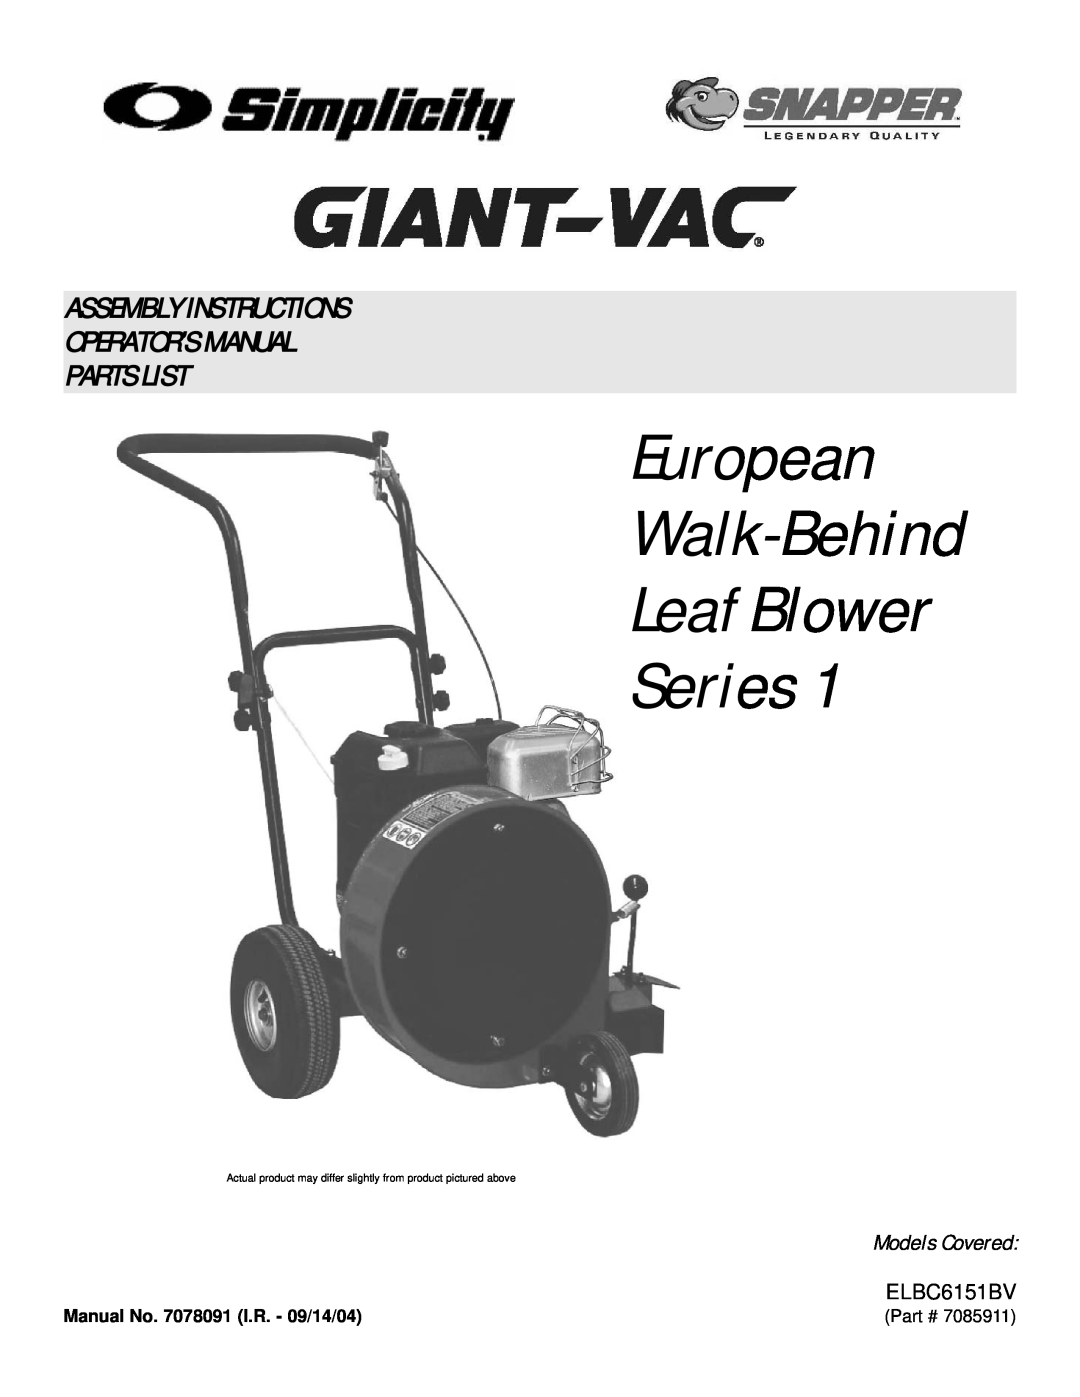 Snapper ELBC6151BV manual European Walk-Behind Leaf Blower Series, Assembly Instructions Operator’S Manual, Parts List 